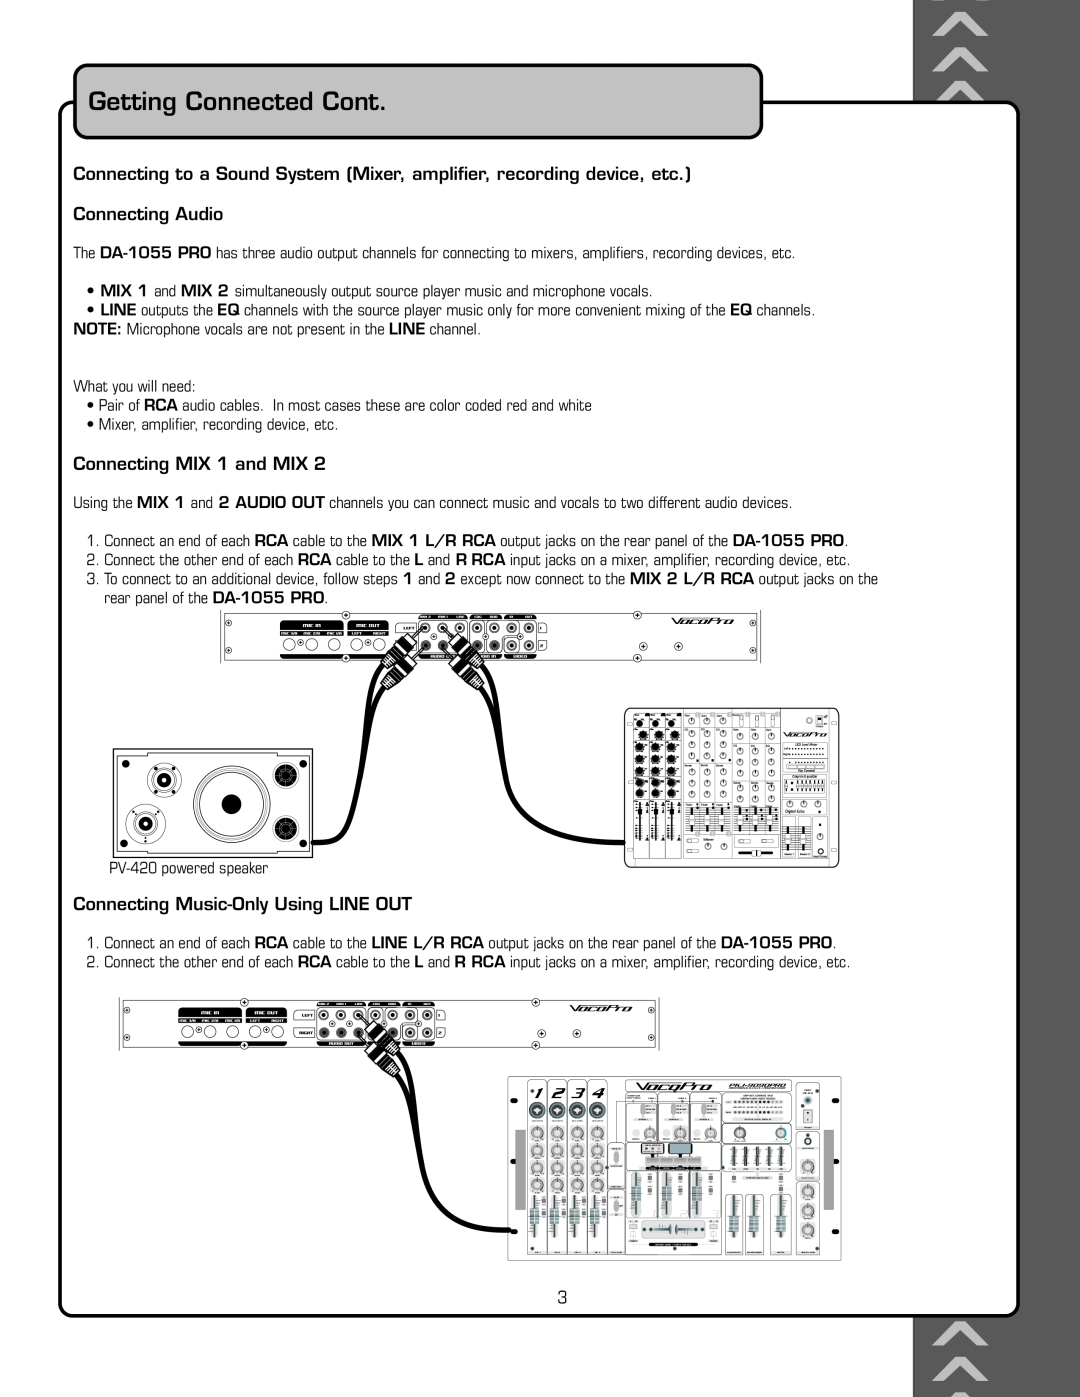 VocoPro DA-1055 PRO owner manual Getting Connected Cont, Connecting Audio, Connecting MIX 1 and MIX 